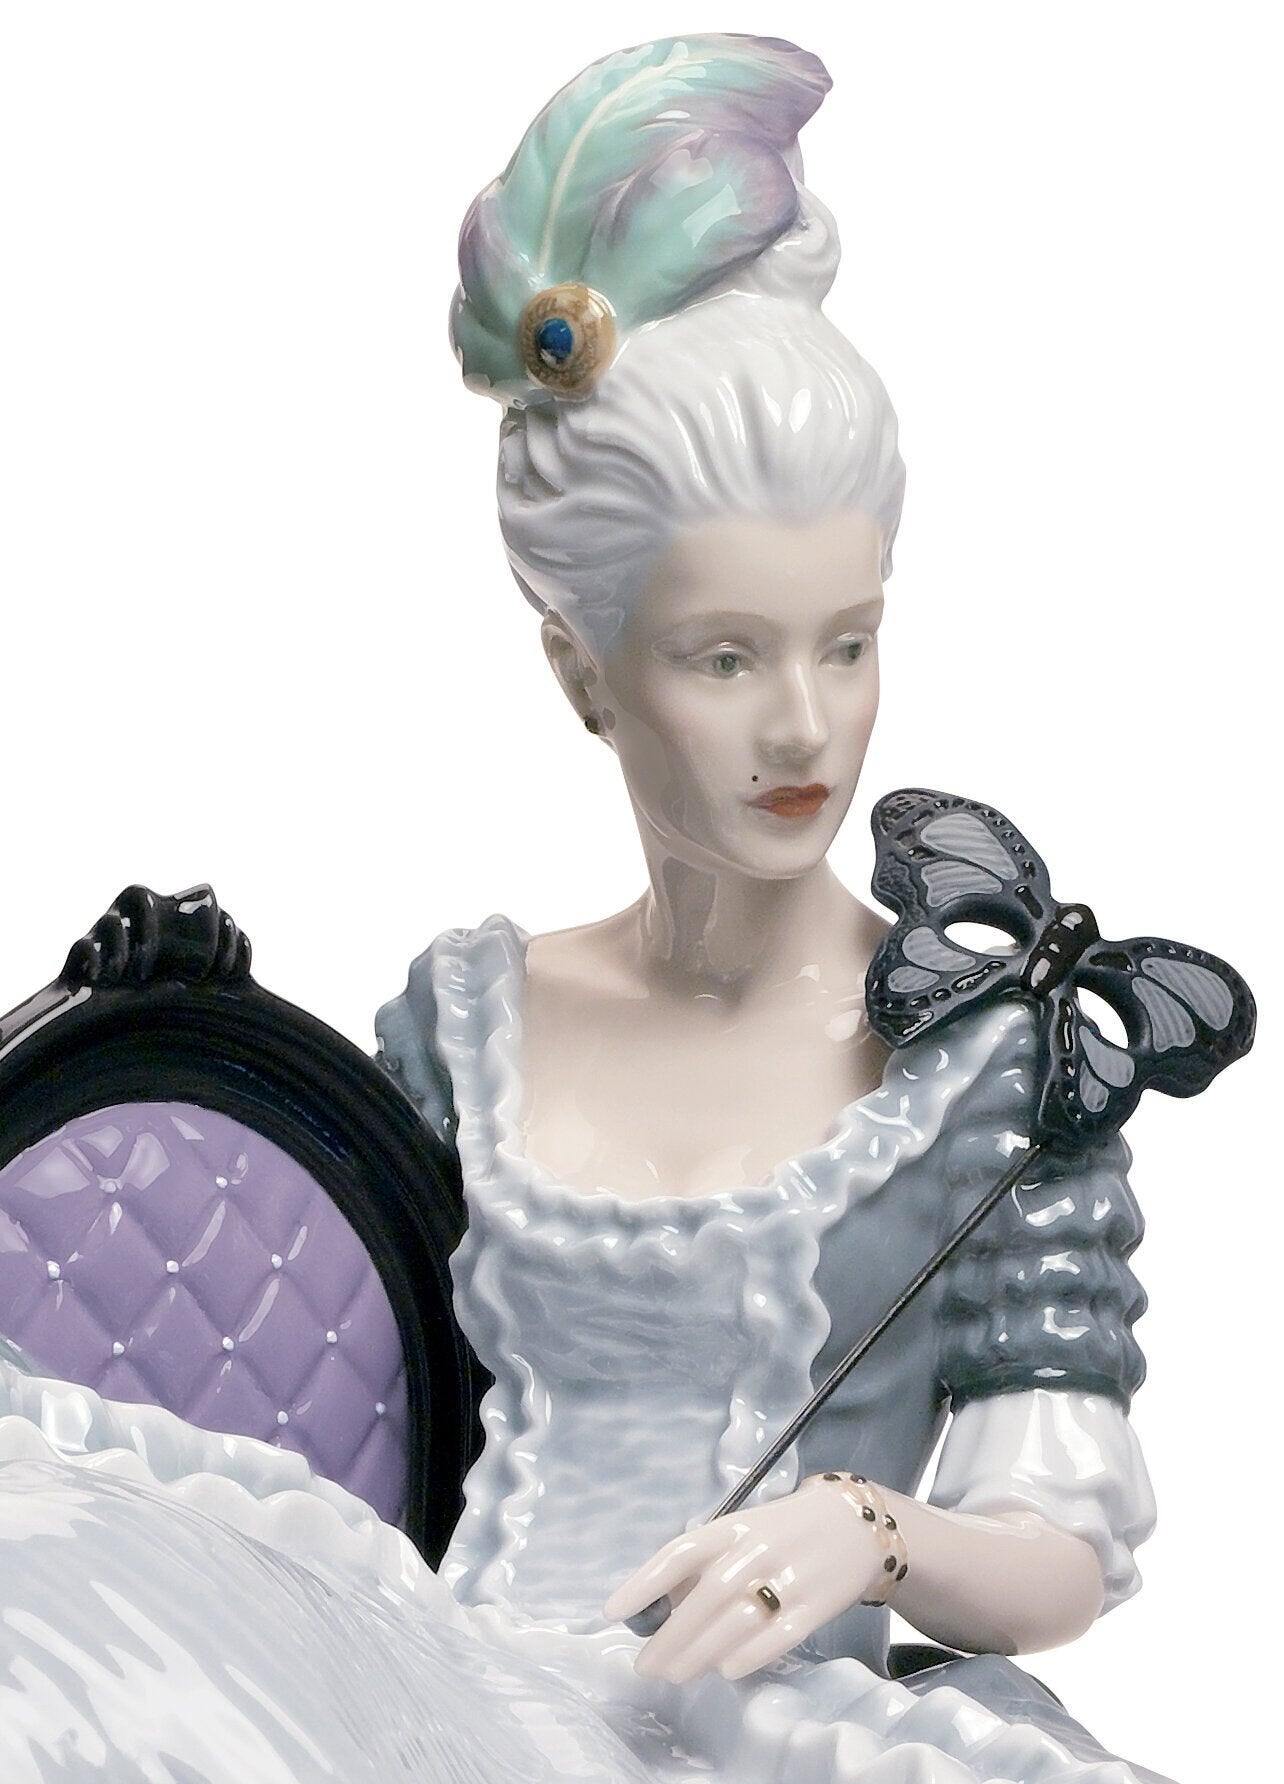 Rococo Lady at The Ball Figurine